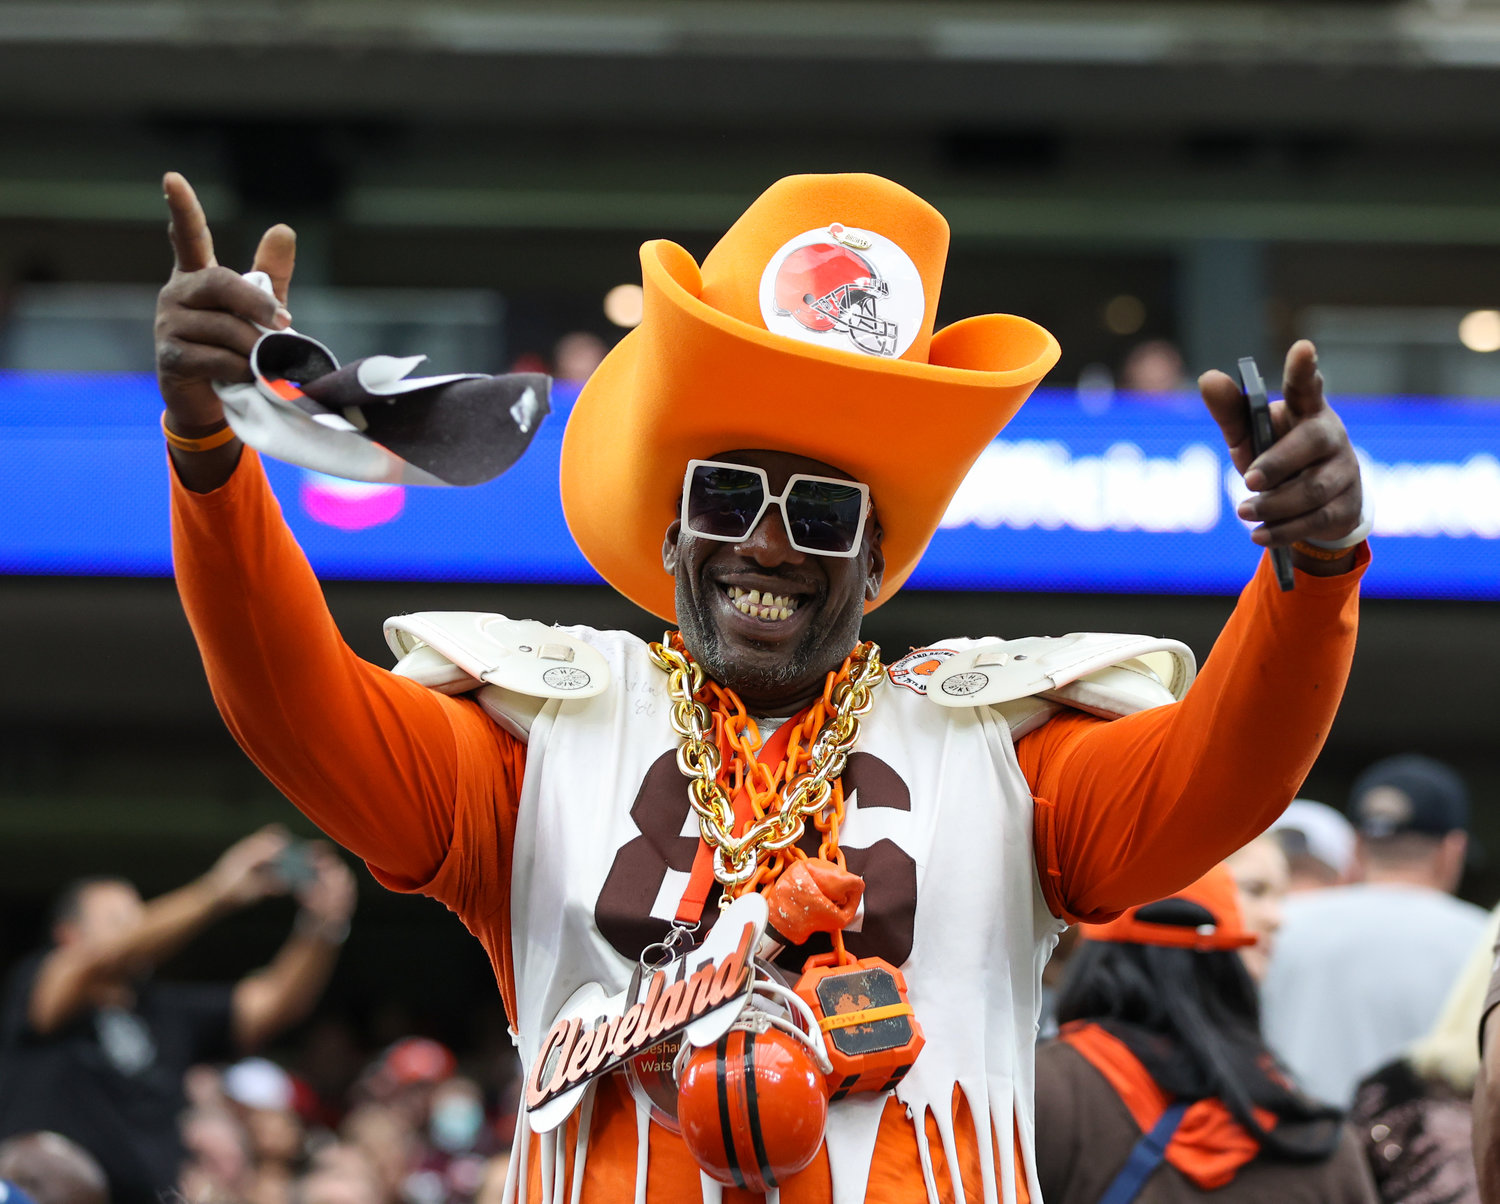 A Cleveland Browns fan during an NFL game between the Houston Texans and the Cleveland Browns on Dec. 4, 2022, in Houston. The Browns won, 27-14.